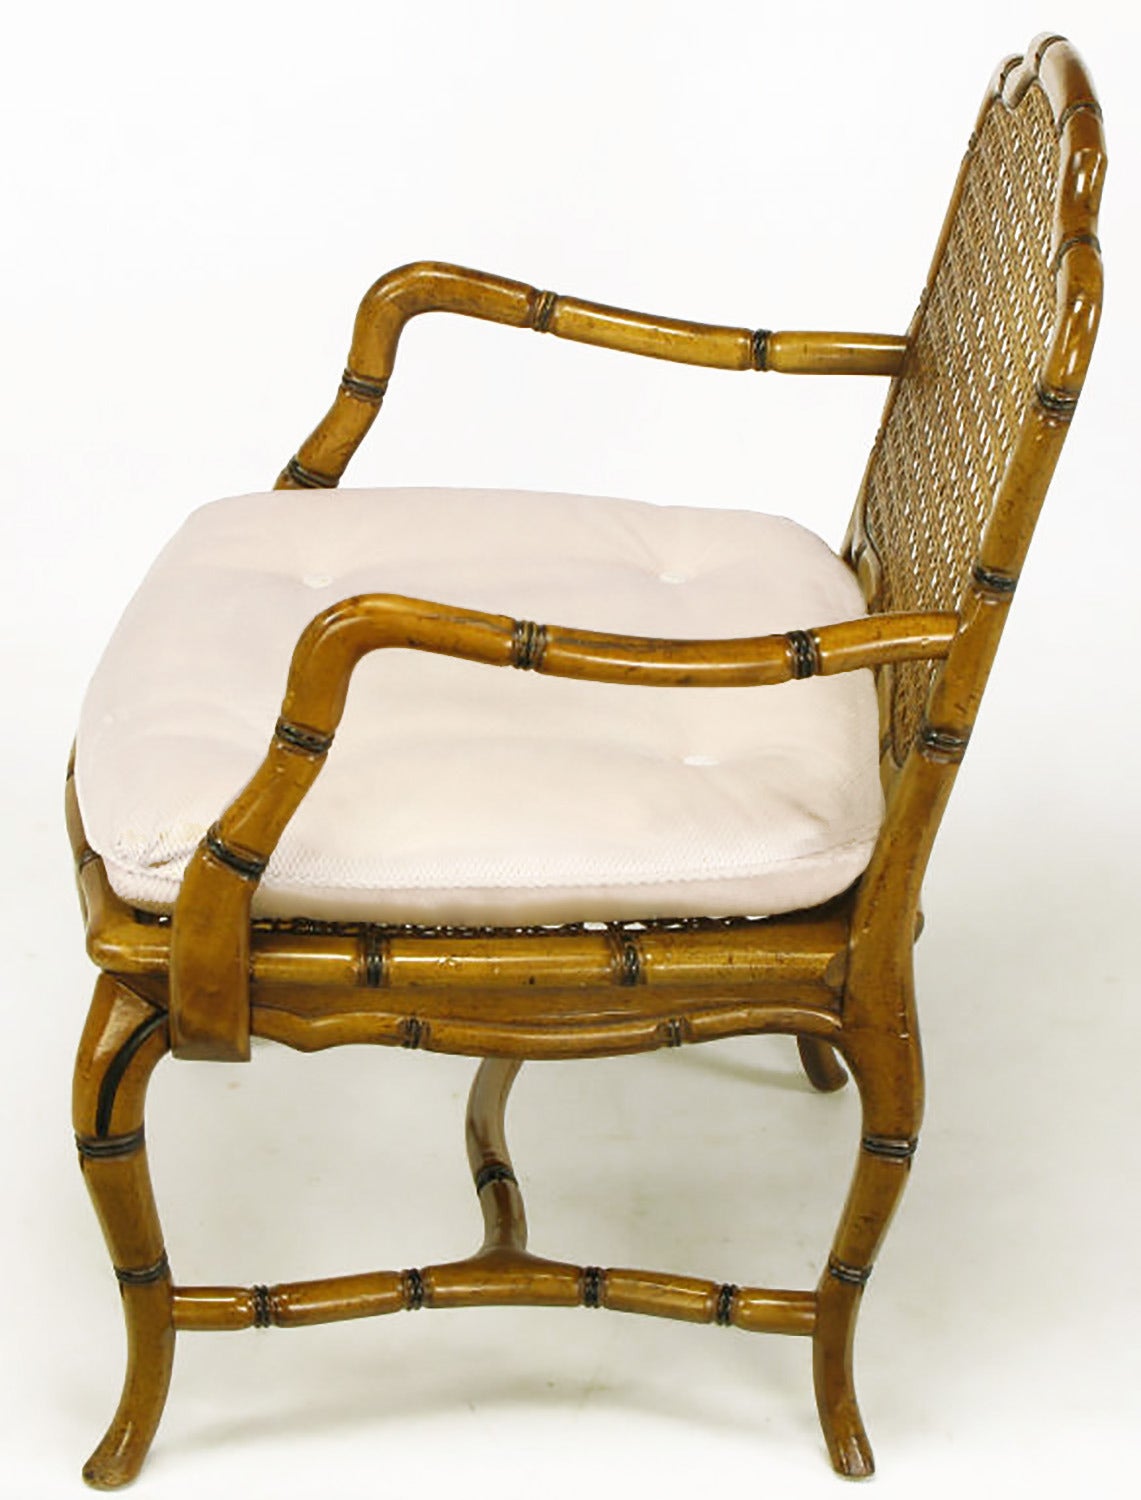 Bamboo-Form Cabriole Leg Cane Back Armchair In Excellent Condition For Sale In Chicago, IL